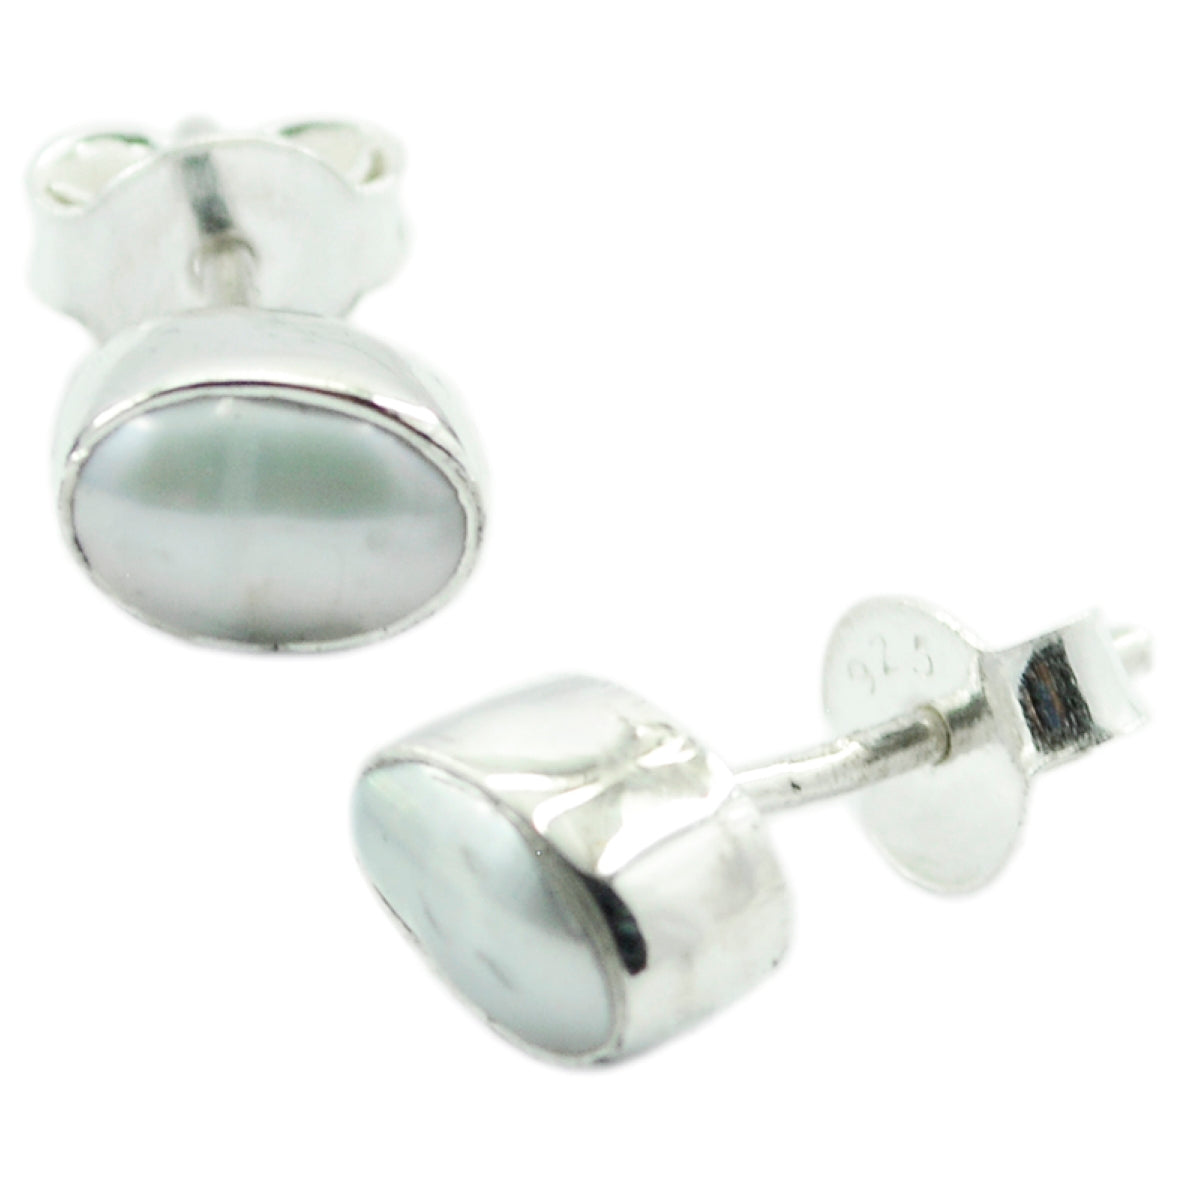 Riyo Genuine Gems oval Cabochon White Peral Silver Earrings gift for women